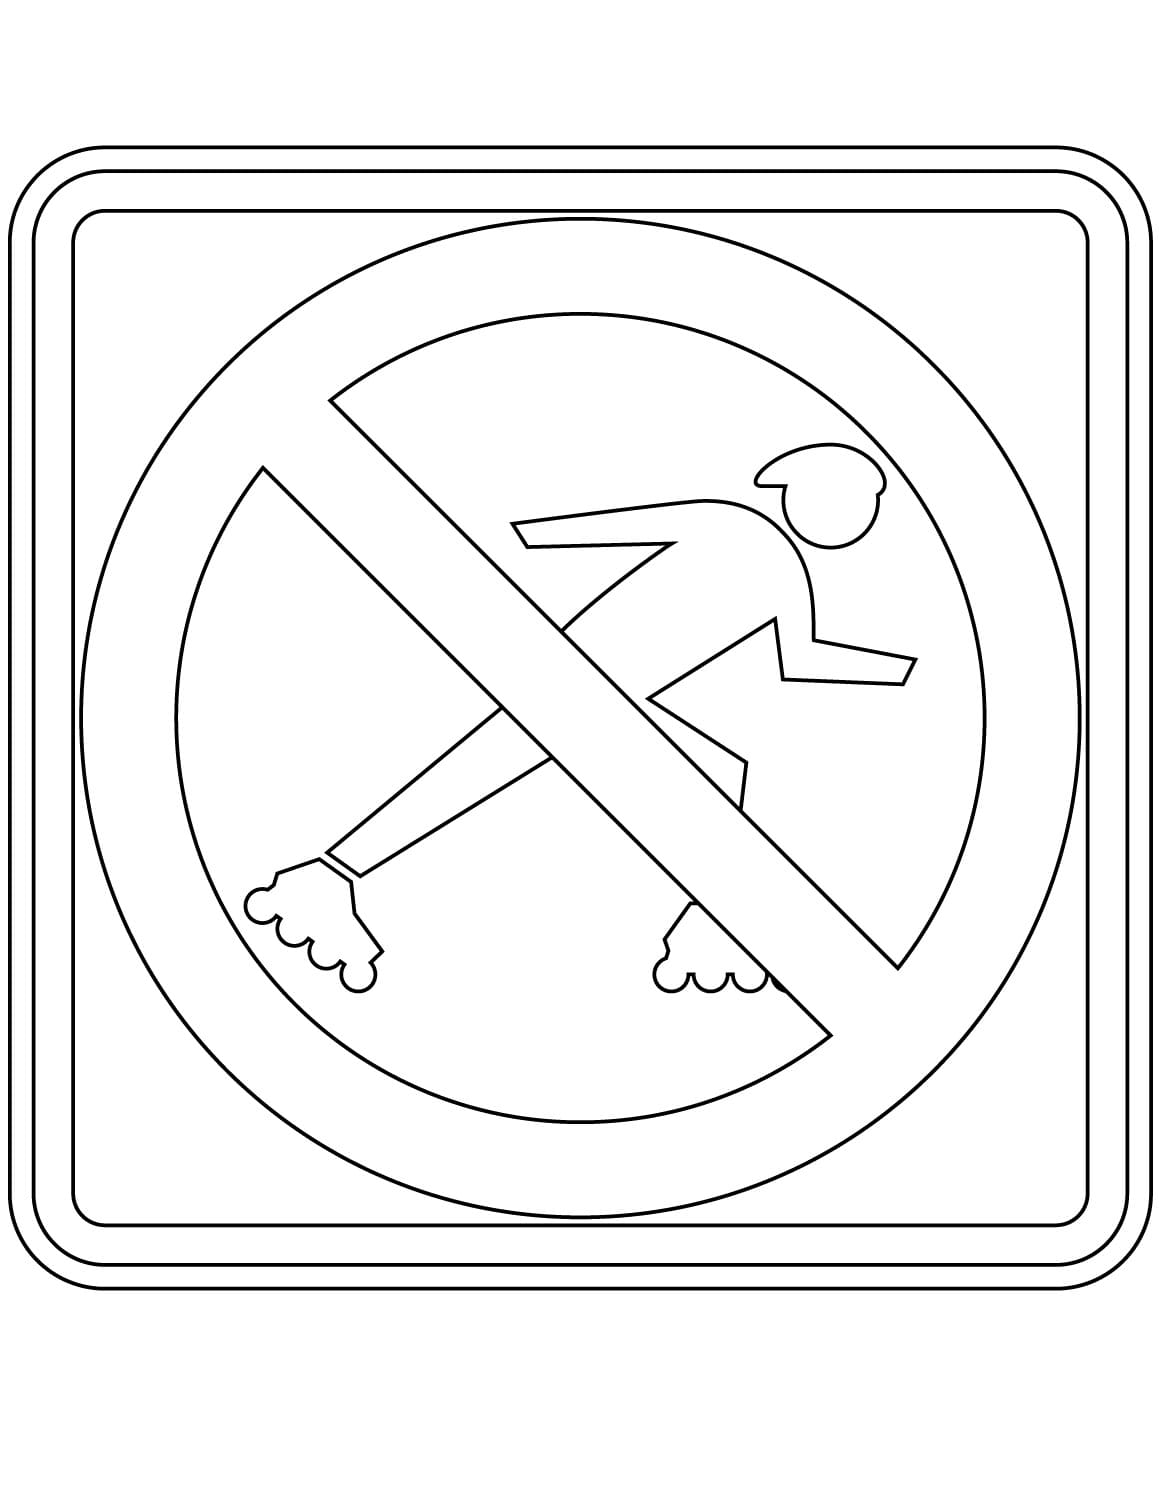 Traffic sign coloring pages coloring pages for kids